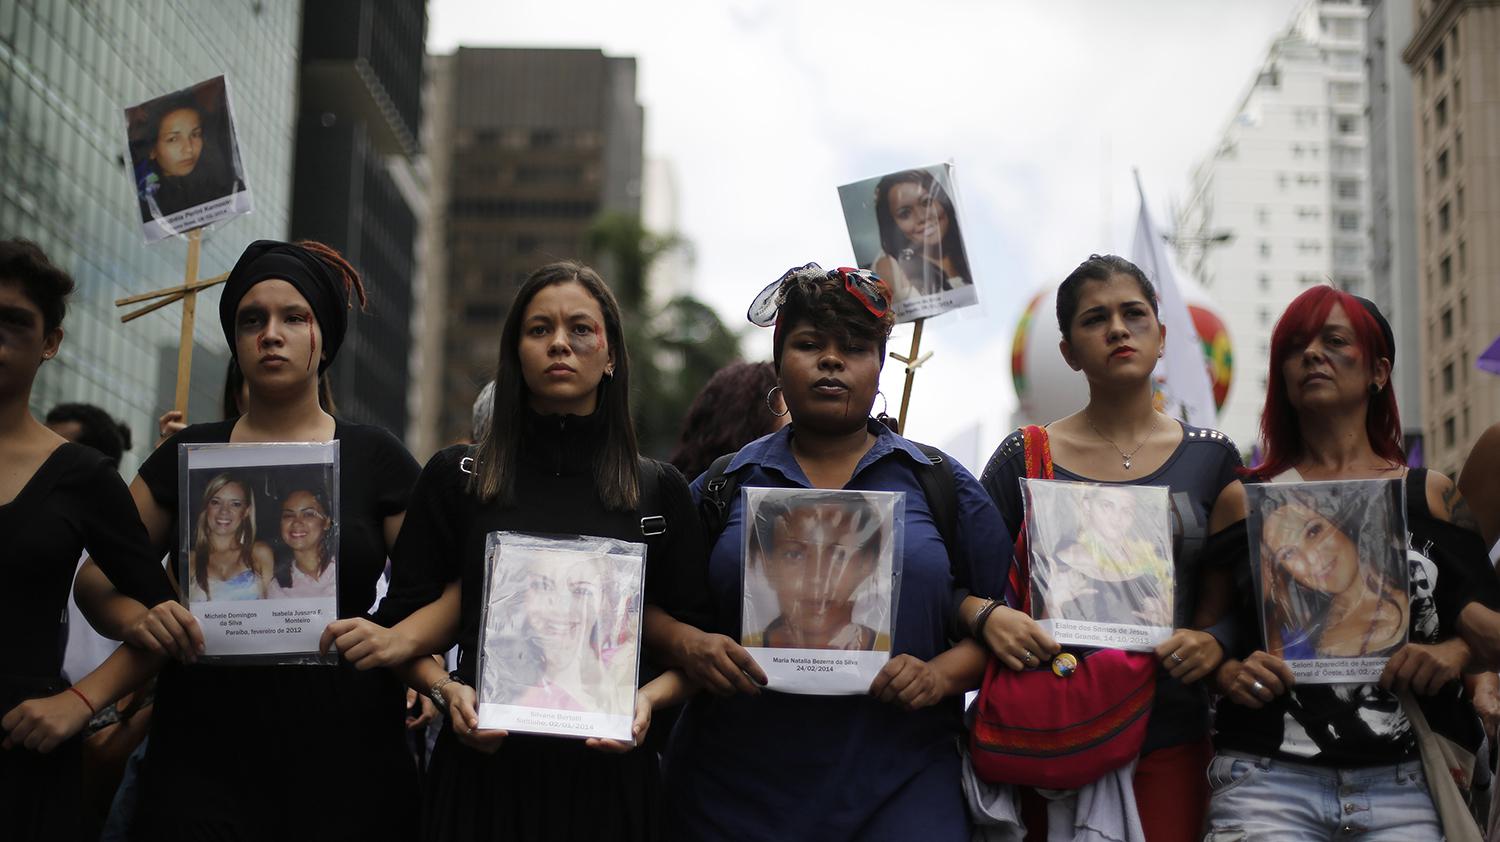 Marchers hold pictures of women killed violently to mark International Women's Day in São Paulo on March 8, 2014.